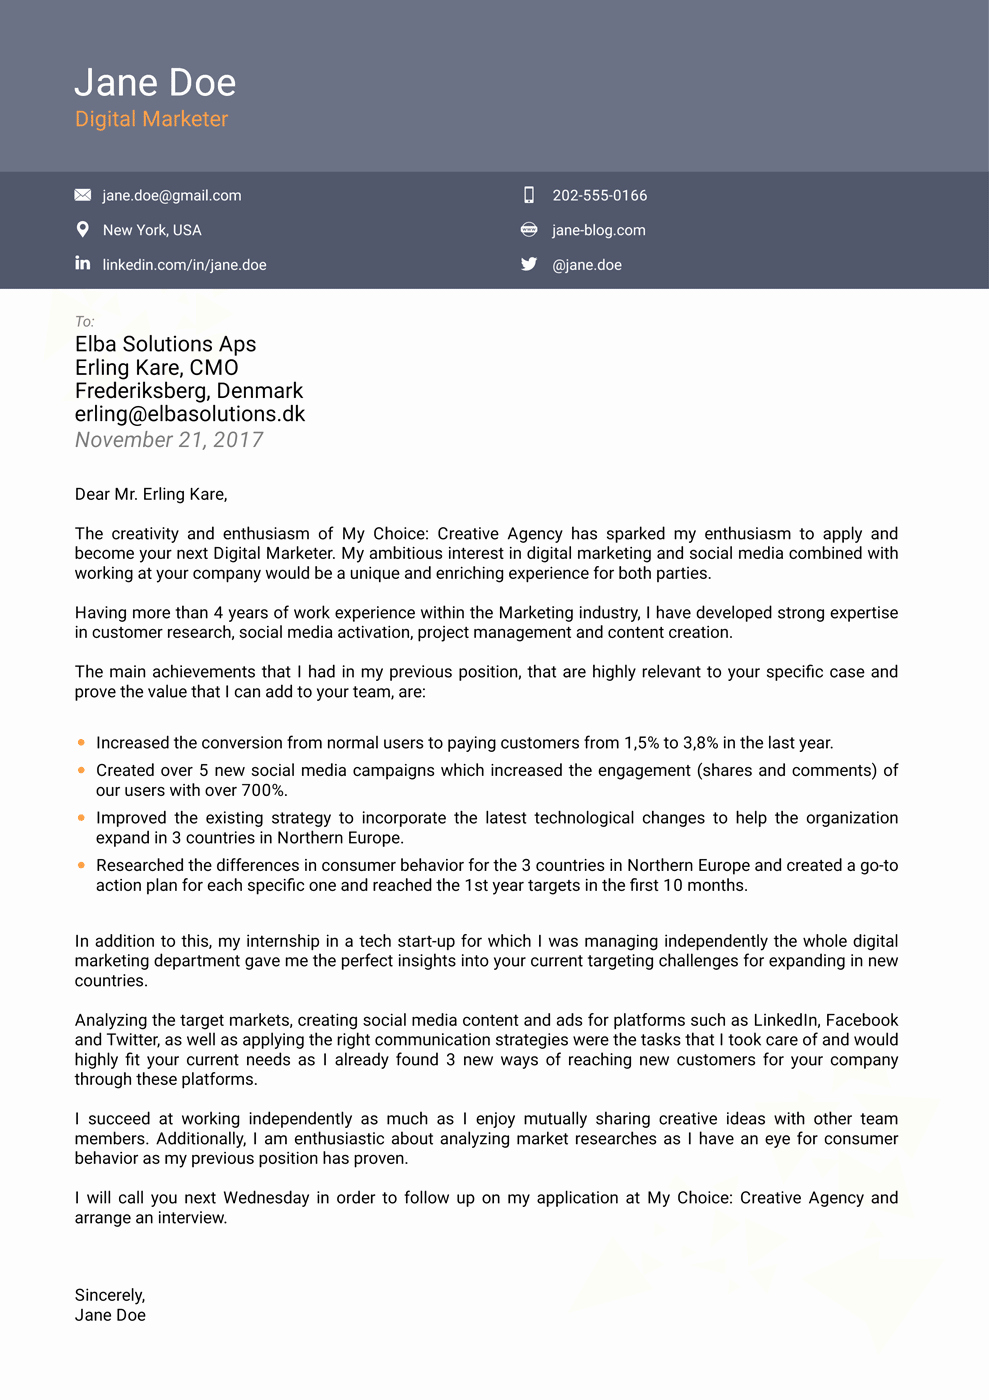 2018 Professional Cover Letter Templates Download now